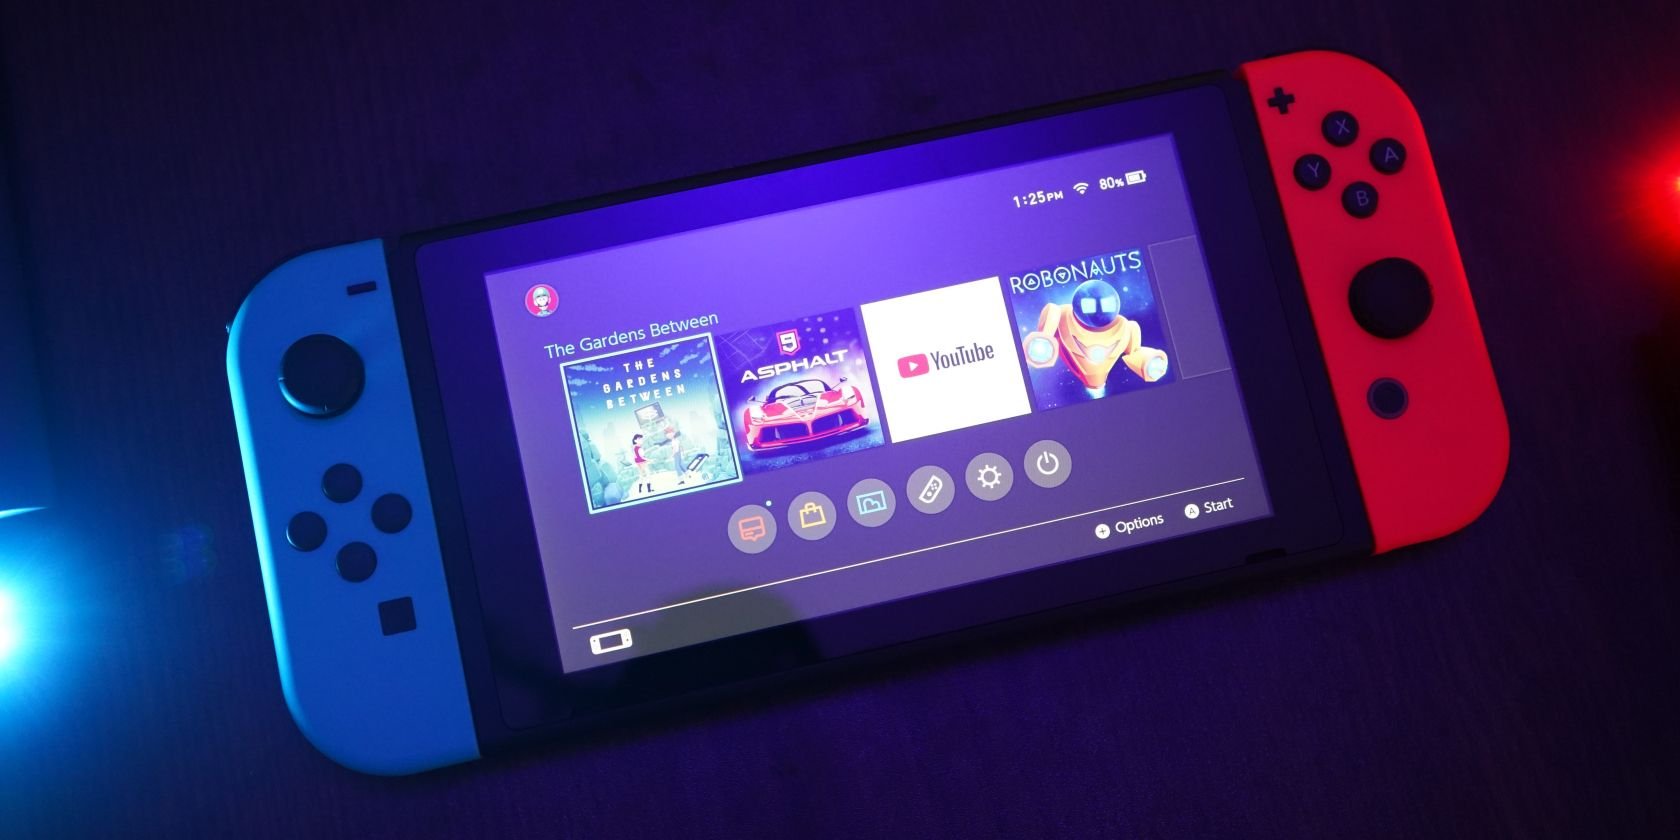 6 Streaming Services You Can Use on Your Nintendo Switch